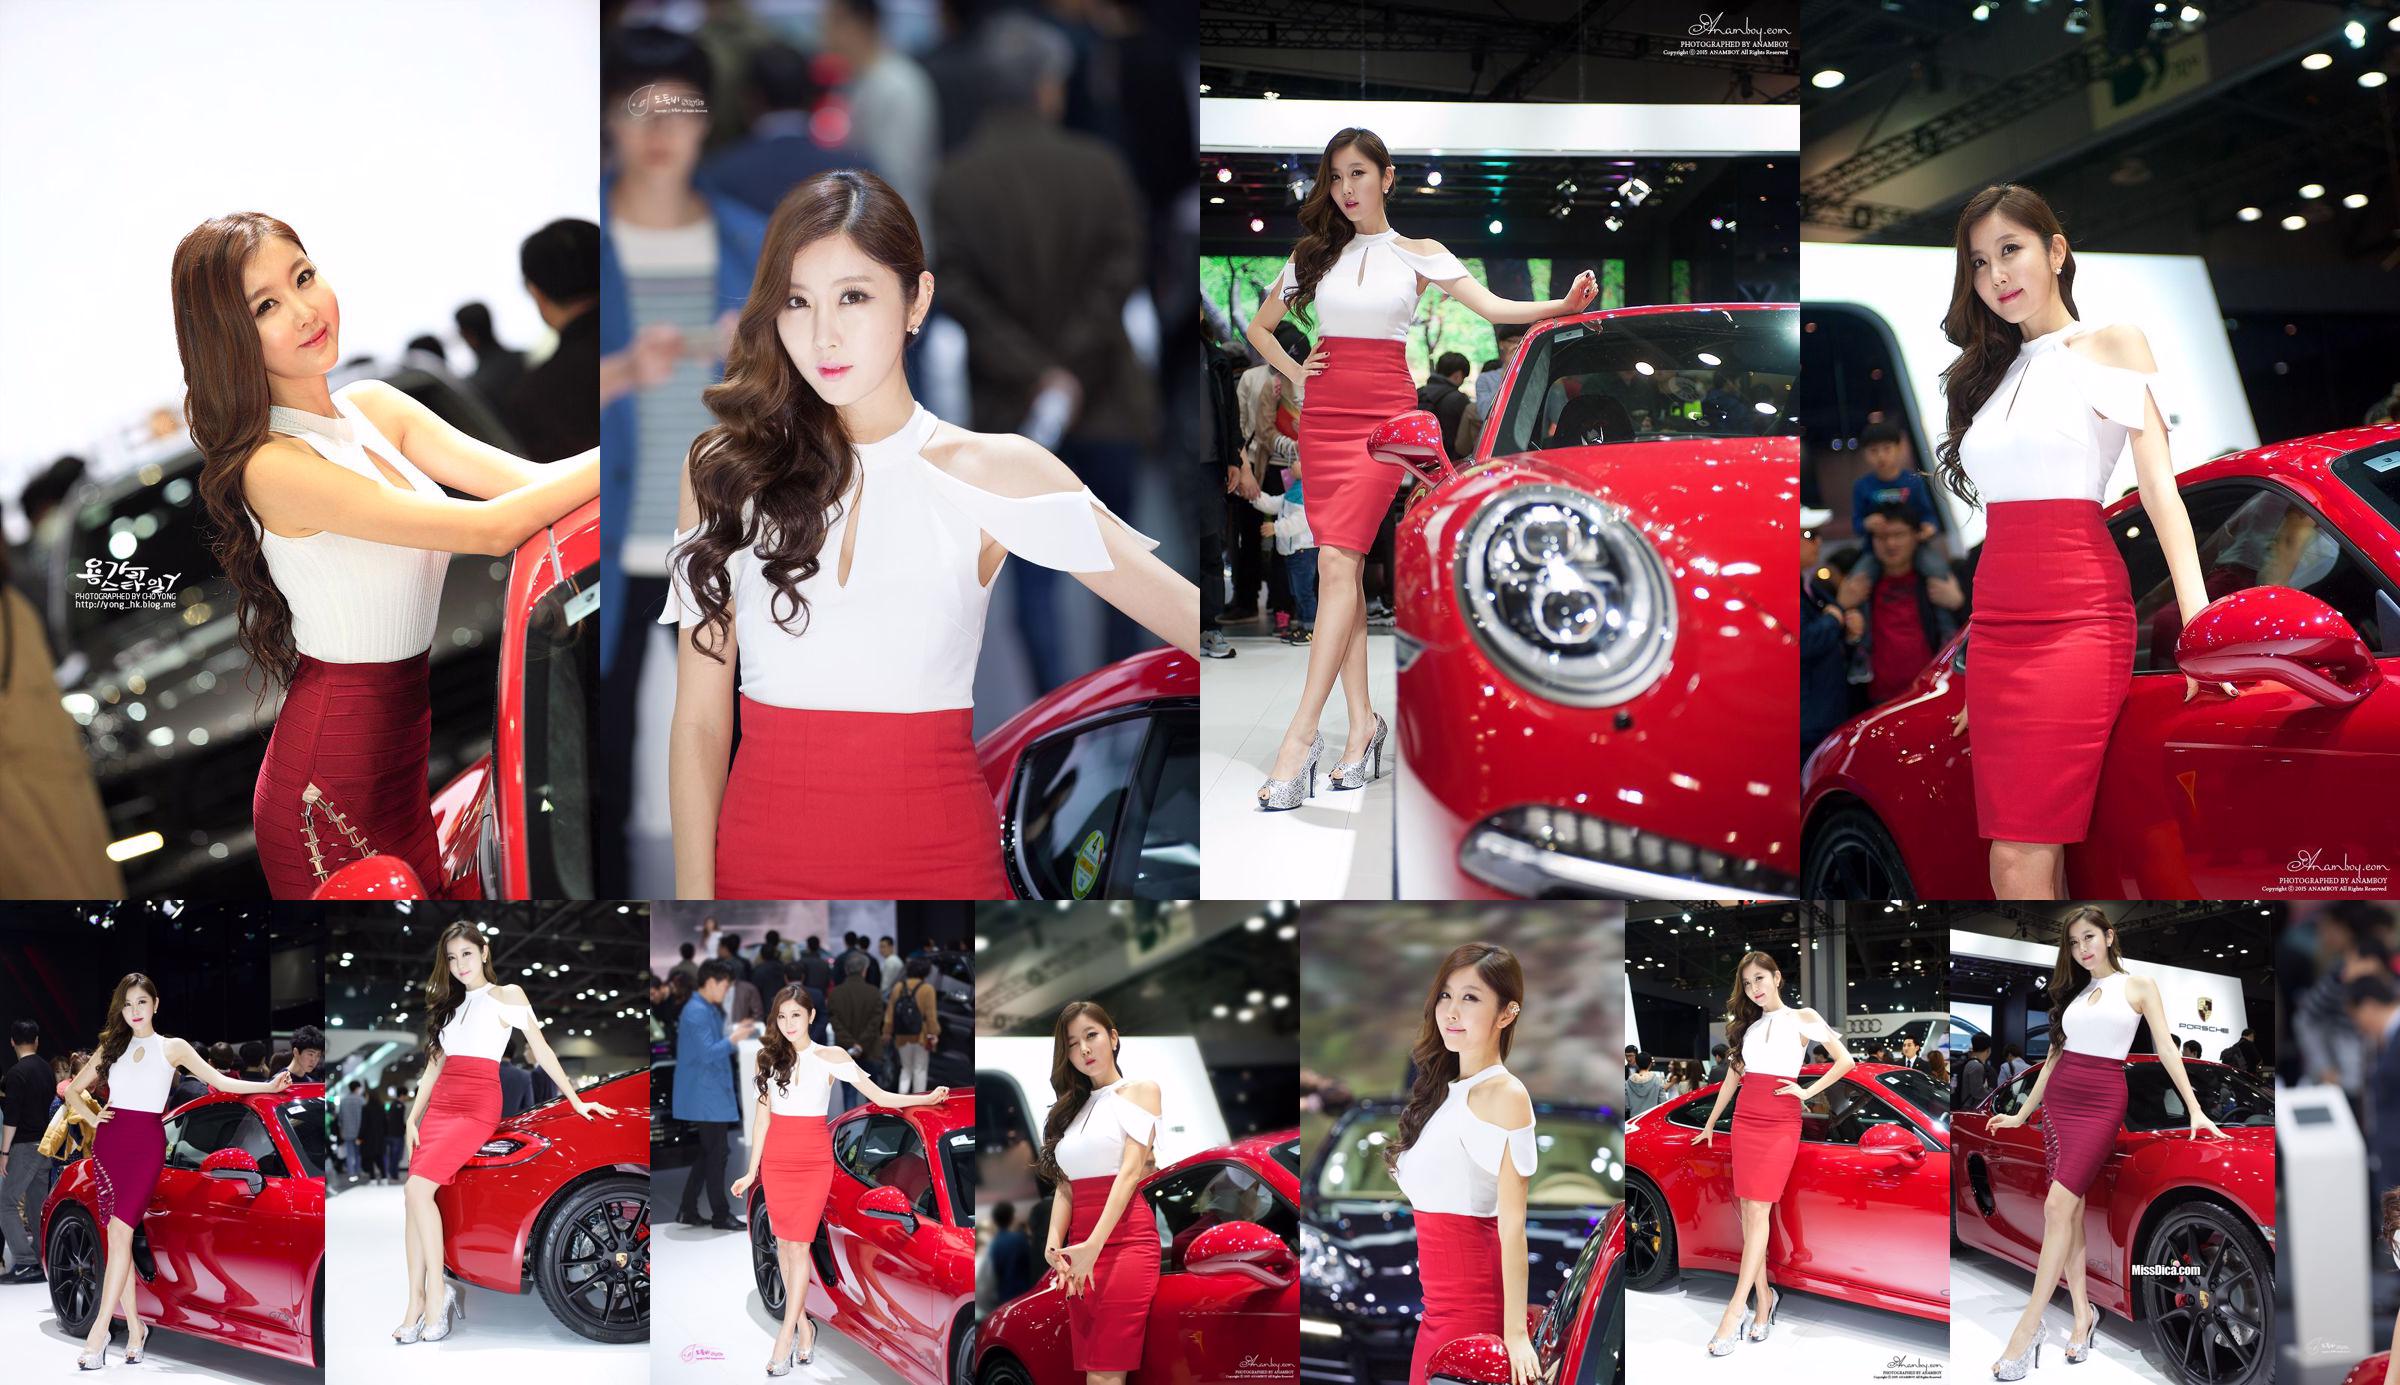 Photo Collection of Korean Car Model Cui Xingya/Cui Xinger's "Red Skirt Series at Auto Show" No.d1fb4f Page 9